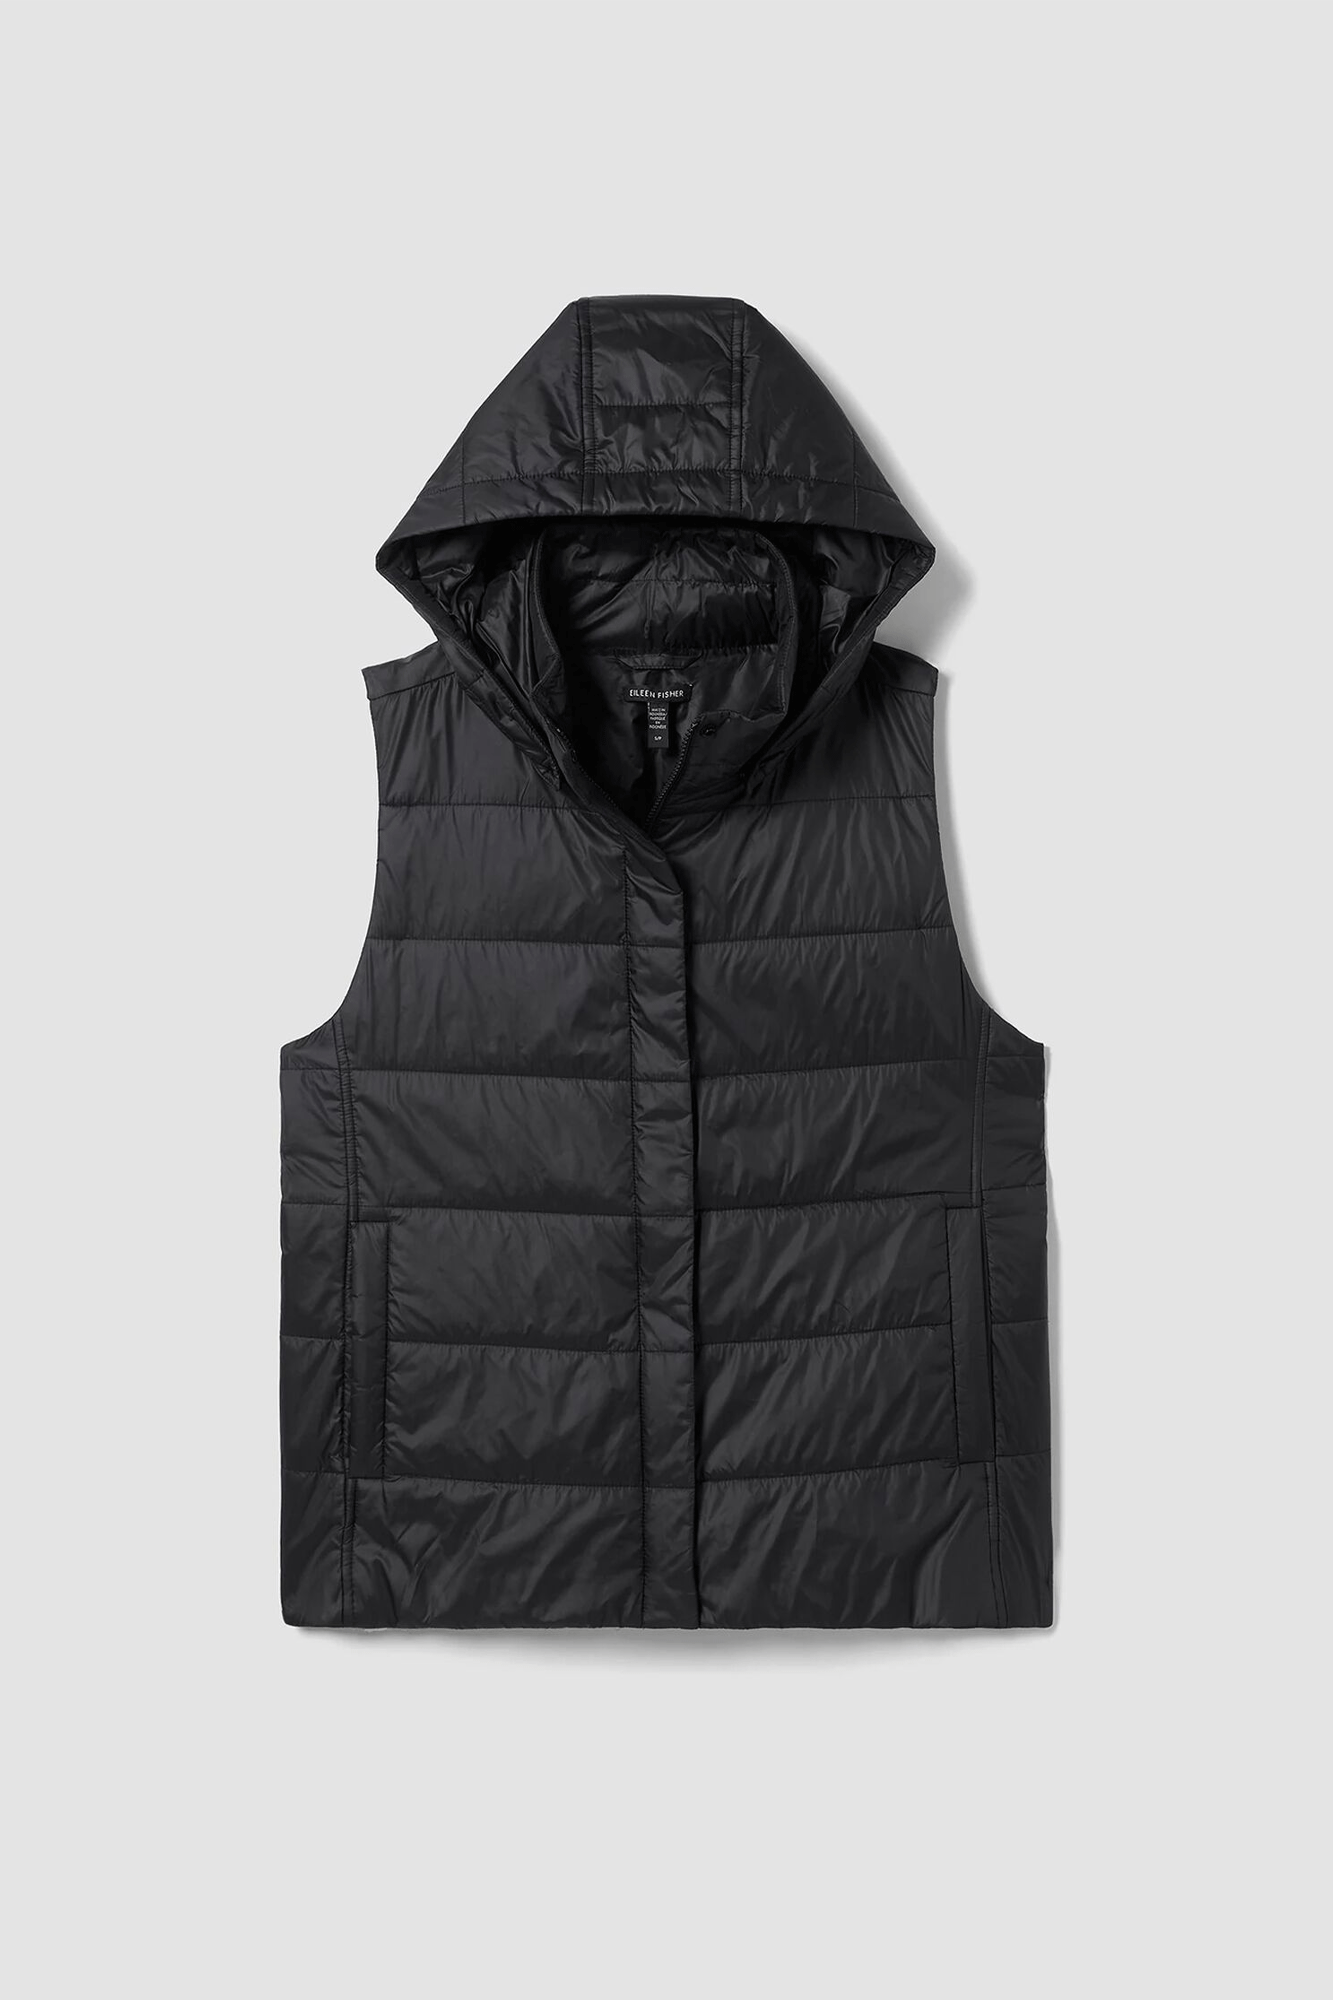 Stay warm this winter with the Padded Vest with Removable Hood from Eileen Fisher! Made from recycled nylon material that traps heat efficiently and is eco-friendly, this stylish seasonal staple features a secure front zip closure and a detachable hood for added comfort.